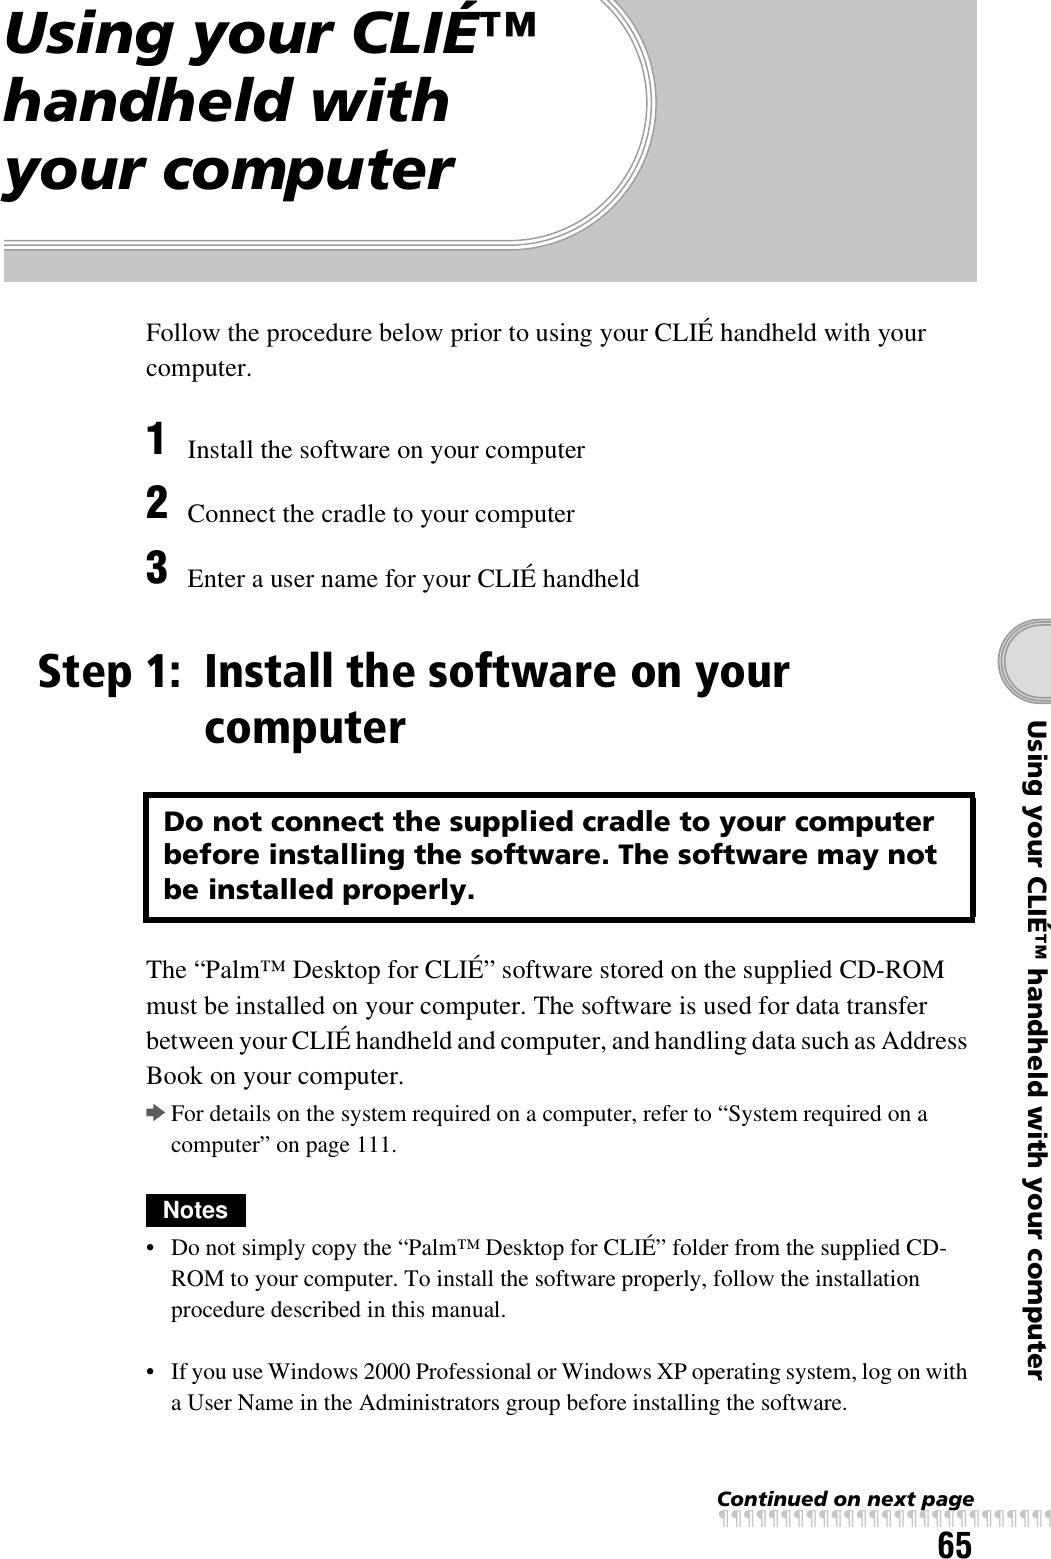 65Using your CLIÉ™ handheld with your computerUsing your CLIÉ™ handheld with your computerFollow the procedure below prior to using your CLIÉ handheld with your computer.Step 1: Install the software on your computerThe “Palm™ Desktop for CLIÉ” software stored on the supplied CD-ROM must be installed on your computer. The software is used for data transfer between your CLIÉ handheld and computer, and handling data such as Address Book on your computer.bFor details on the system required on a computer, refer to “System required on a computer” on page 111.Notes• Do not simply copy the “Palm™ Desktop for CLIÉ” folder from the supplied CD-ROM to your computer. To install the software properly, follow the installation procedure described in this manual.• If you use Windows 2000 Professional or Windows XP operating system, log on with a User Name in the Administrators group before installing the software.1Install the software on your computer2Connect the cradle to your computer3Enter a user name for your CLIÉ handheldDo not connect the supplied cradle to your computer before installing the software. The software may not be installed properly.Continued on next pagexxxxxxxxxxxxxxxxxxxxxxxxxxx